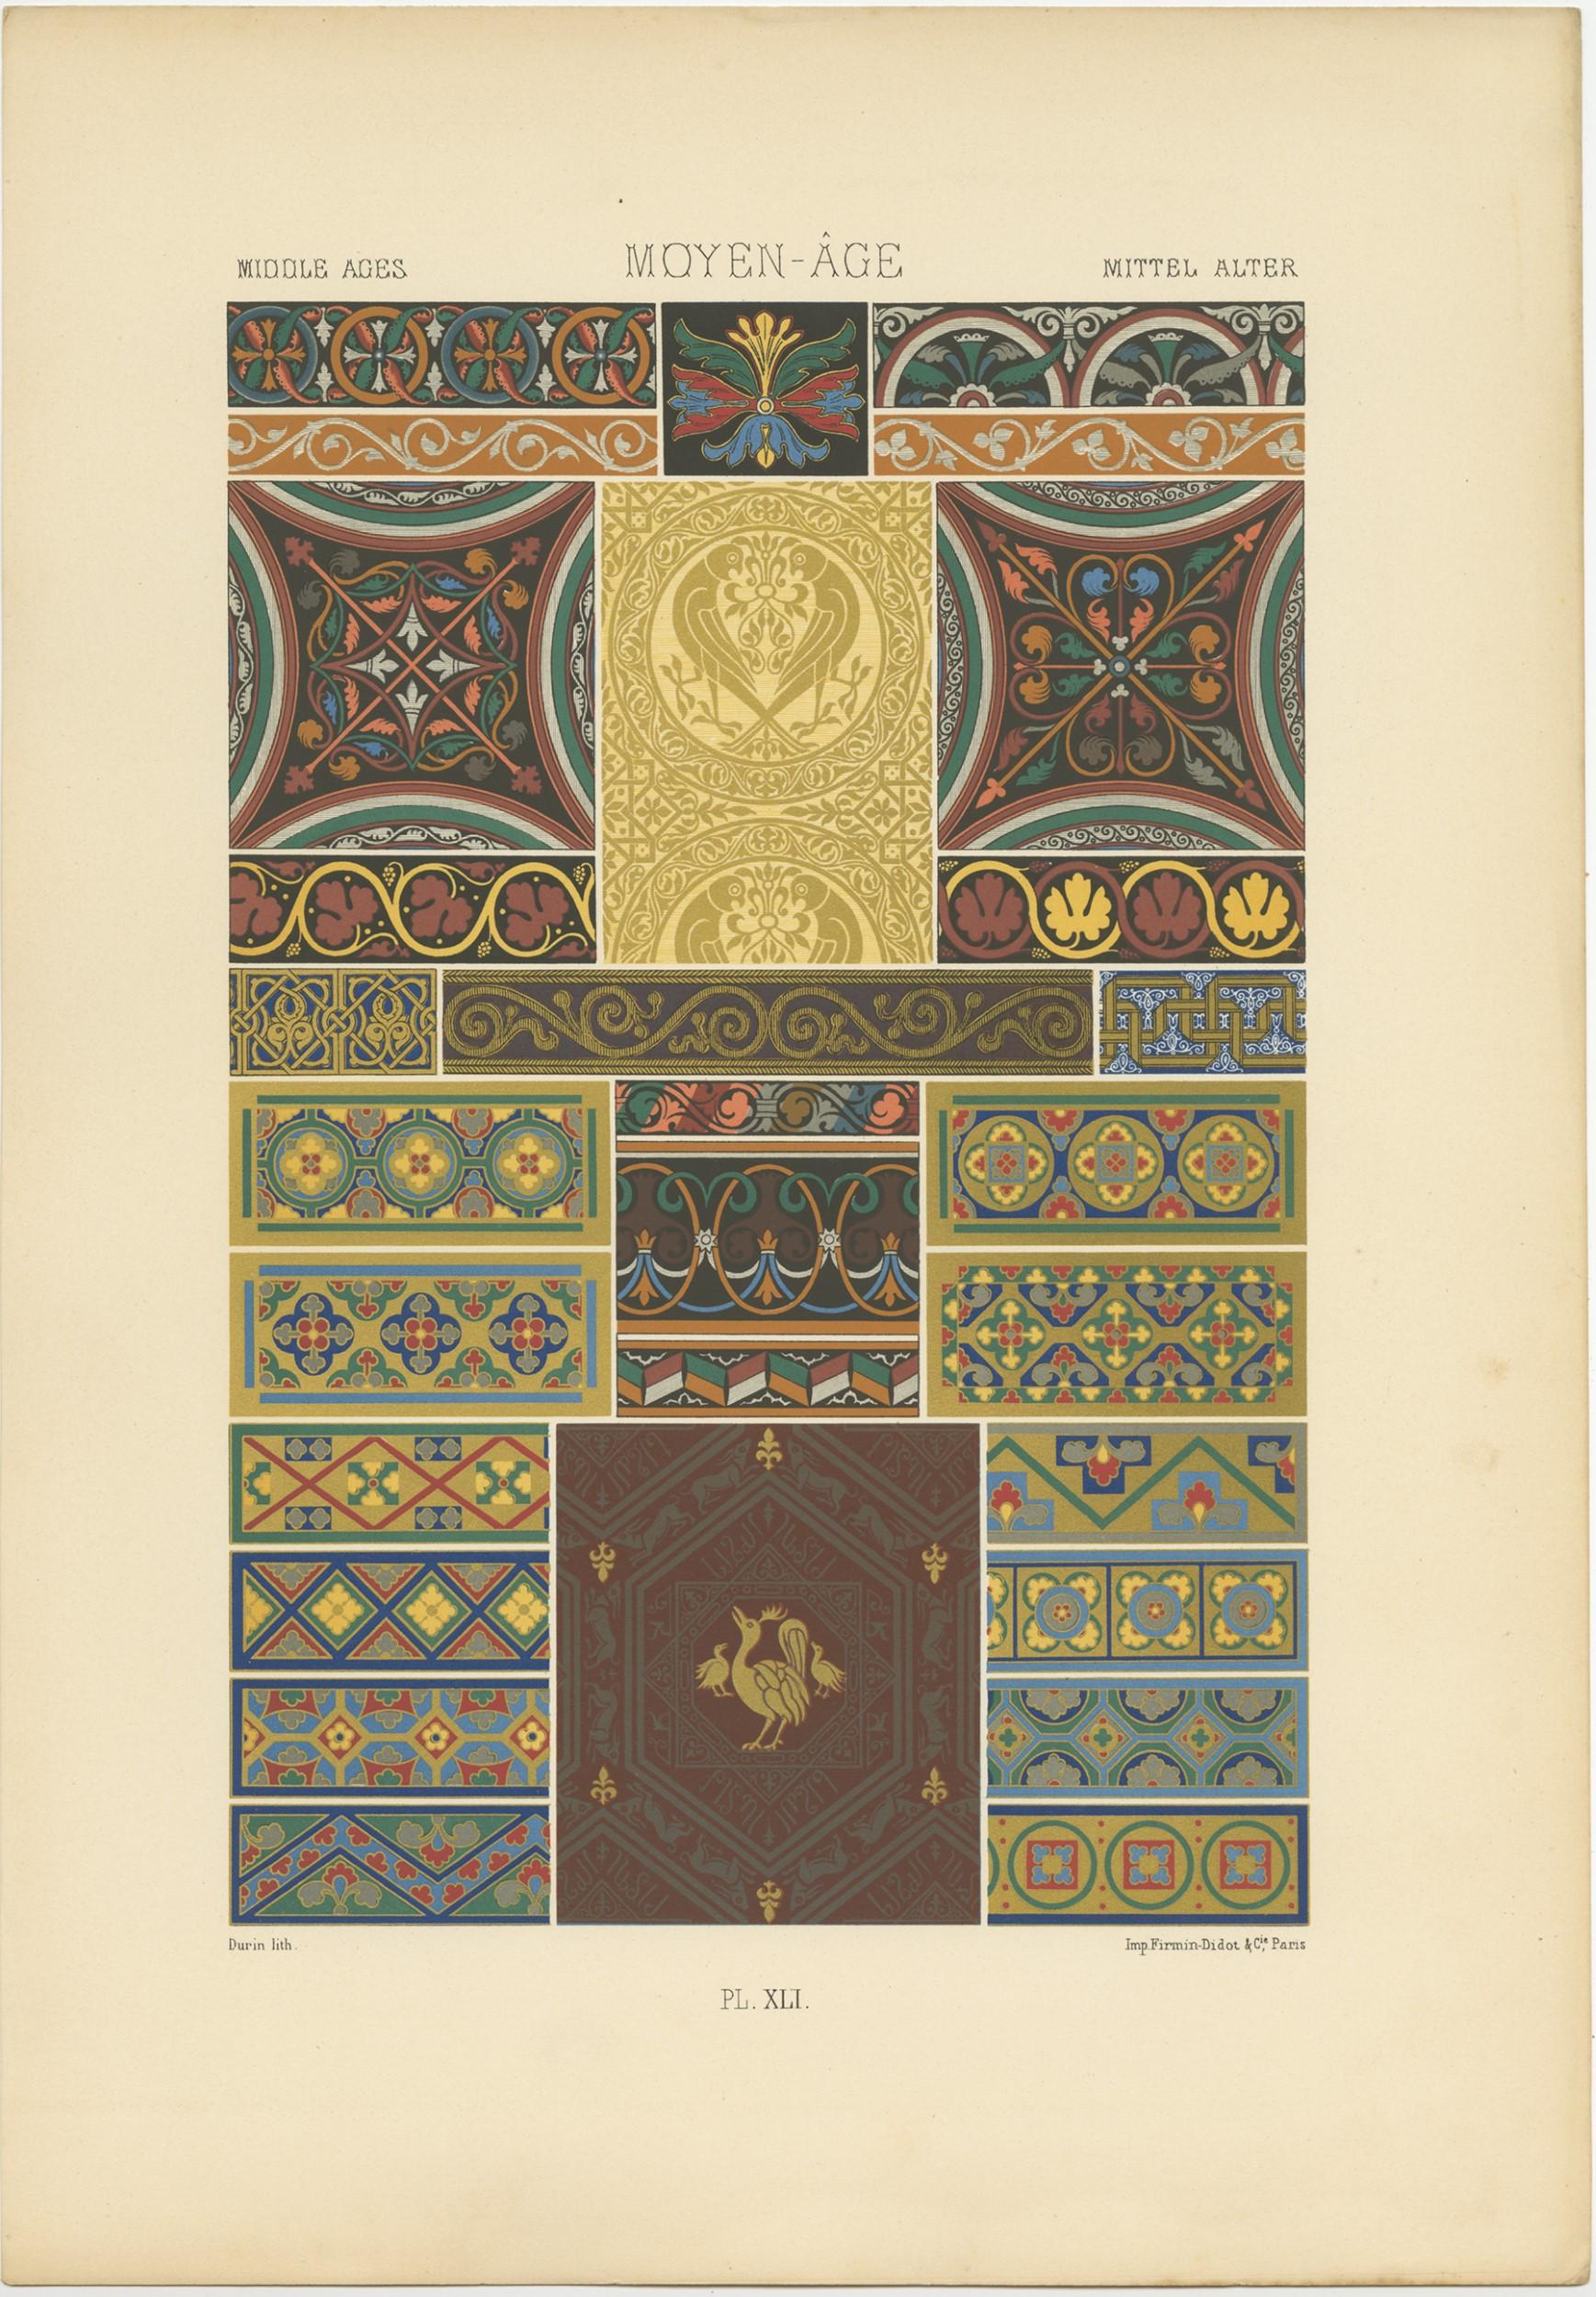 Antique print titled 'Middle Ages - Moyen Âge - Mittel Ages'. Chromolithograph of Middle Ages ornaments and decorative arts. This print originates from 'l'Ornement Polychrome' by Auguste Racinet. Published circa 1890.